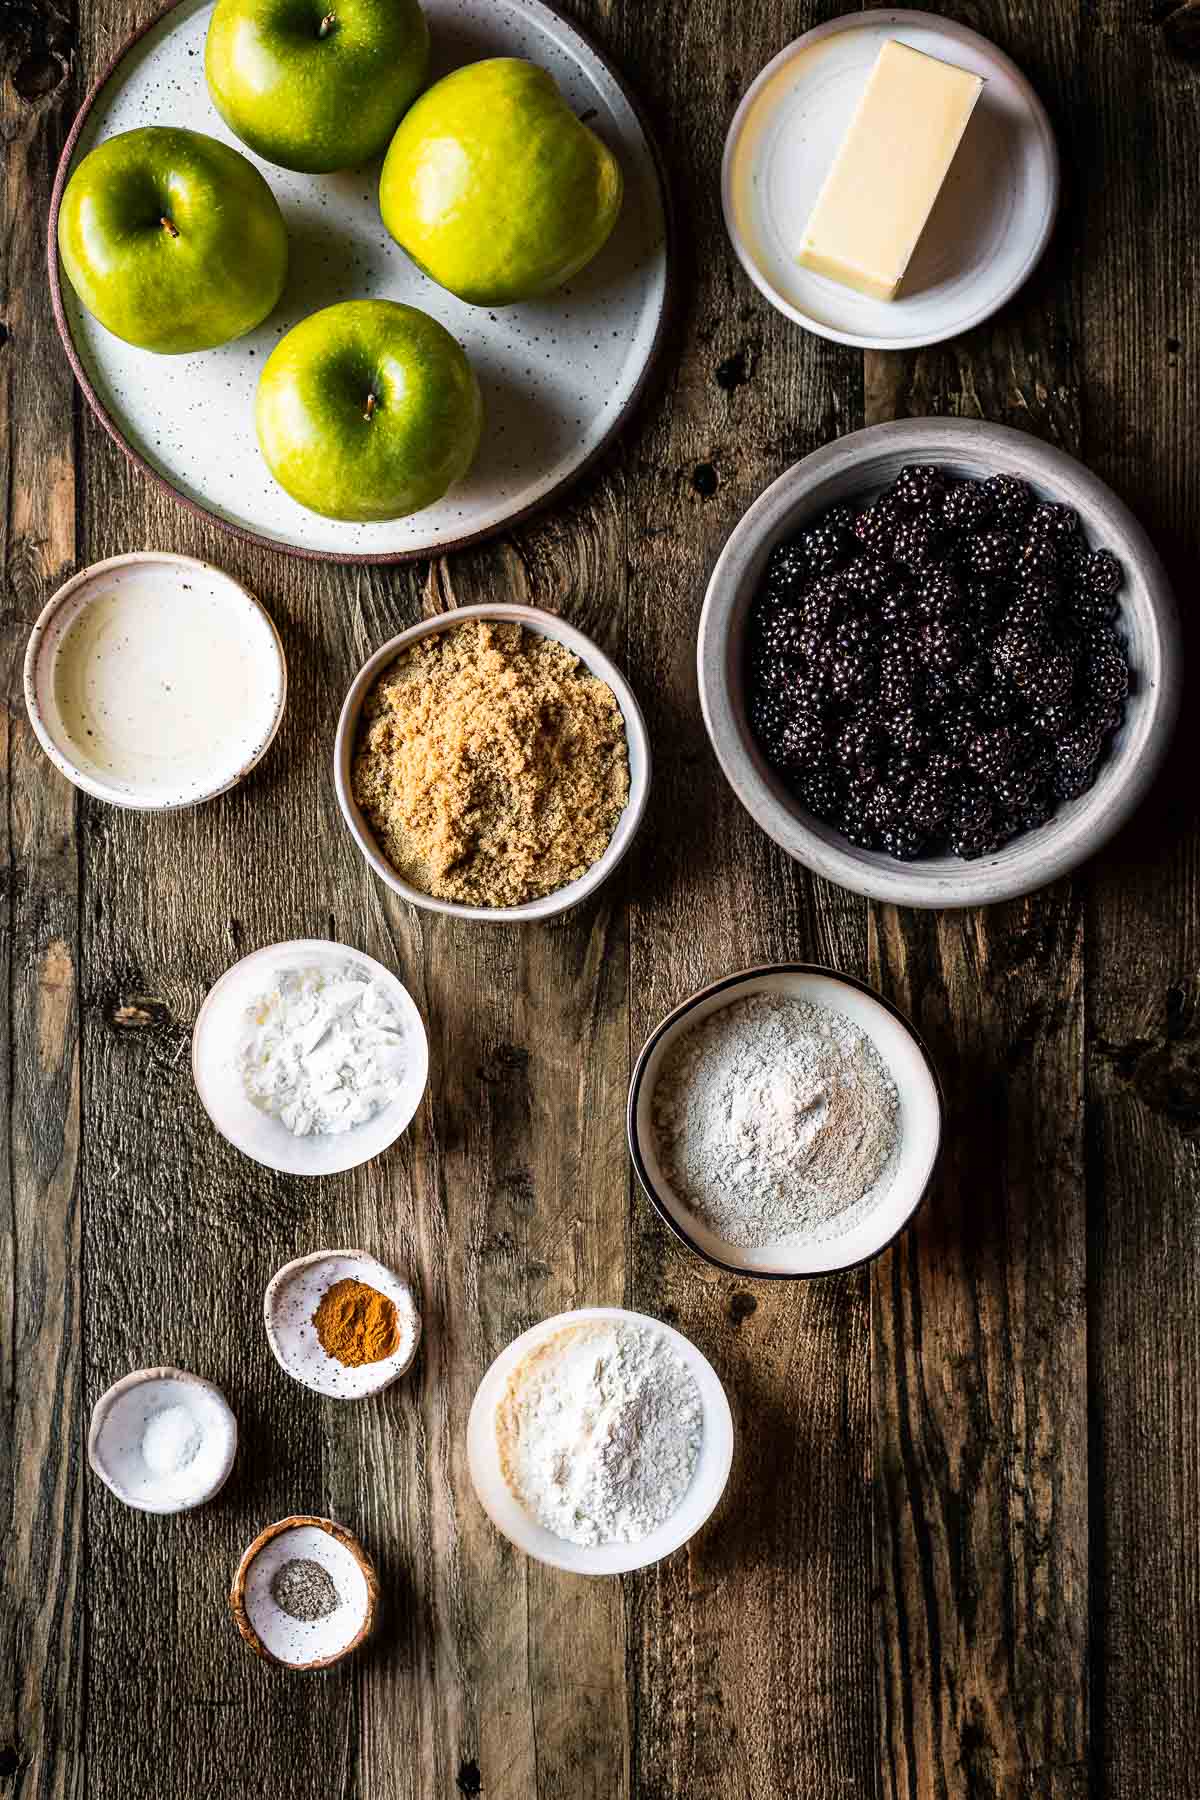 Ingredients for a berry apple crumble in bowls and plates on a rustic wooden tabletop.